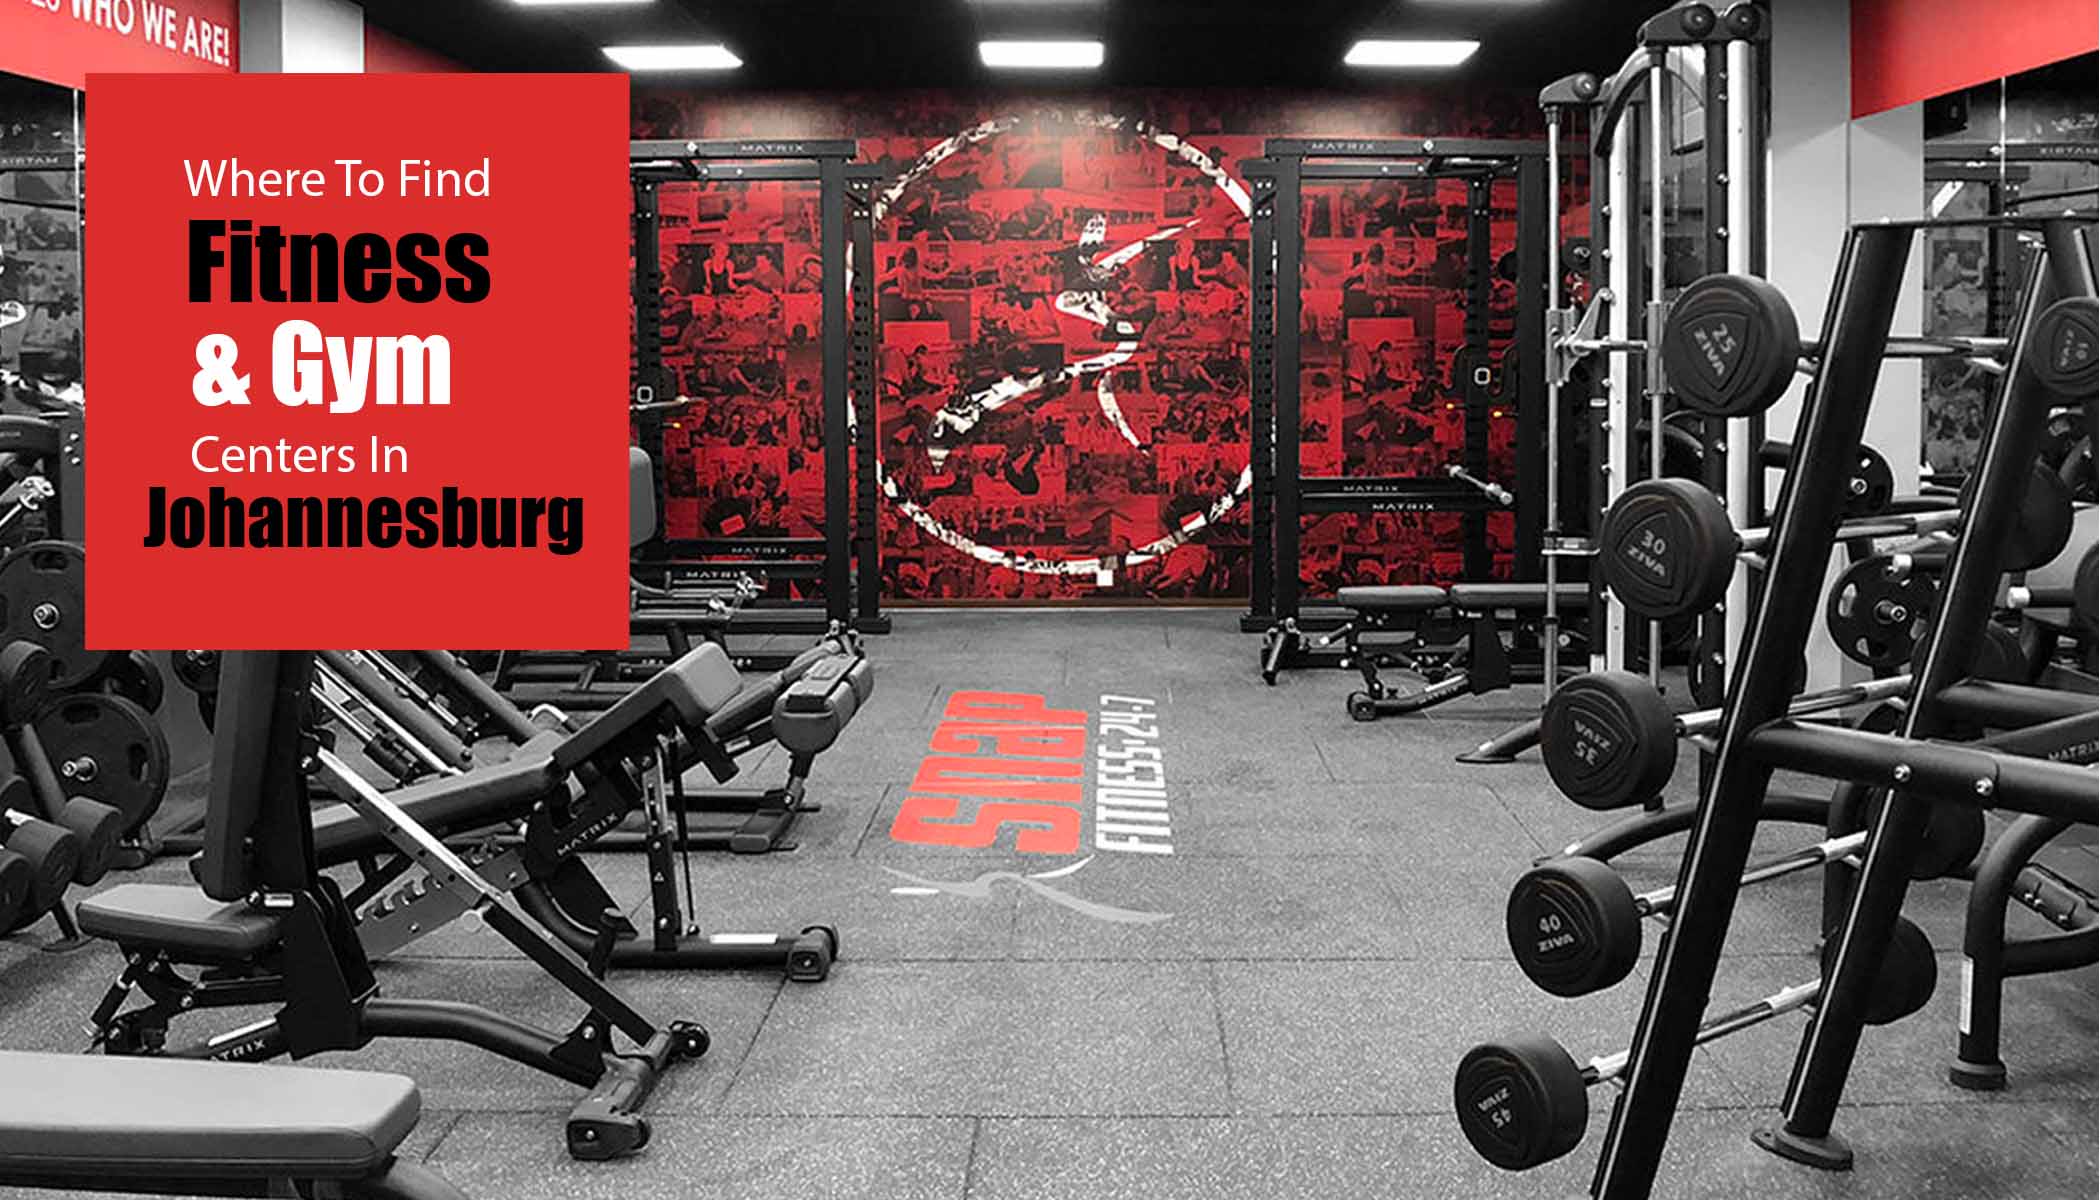 Where to Find Fitness and Gym Centers in Johannesburg